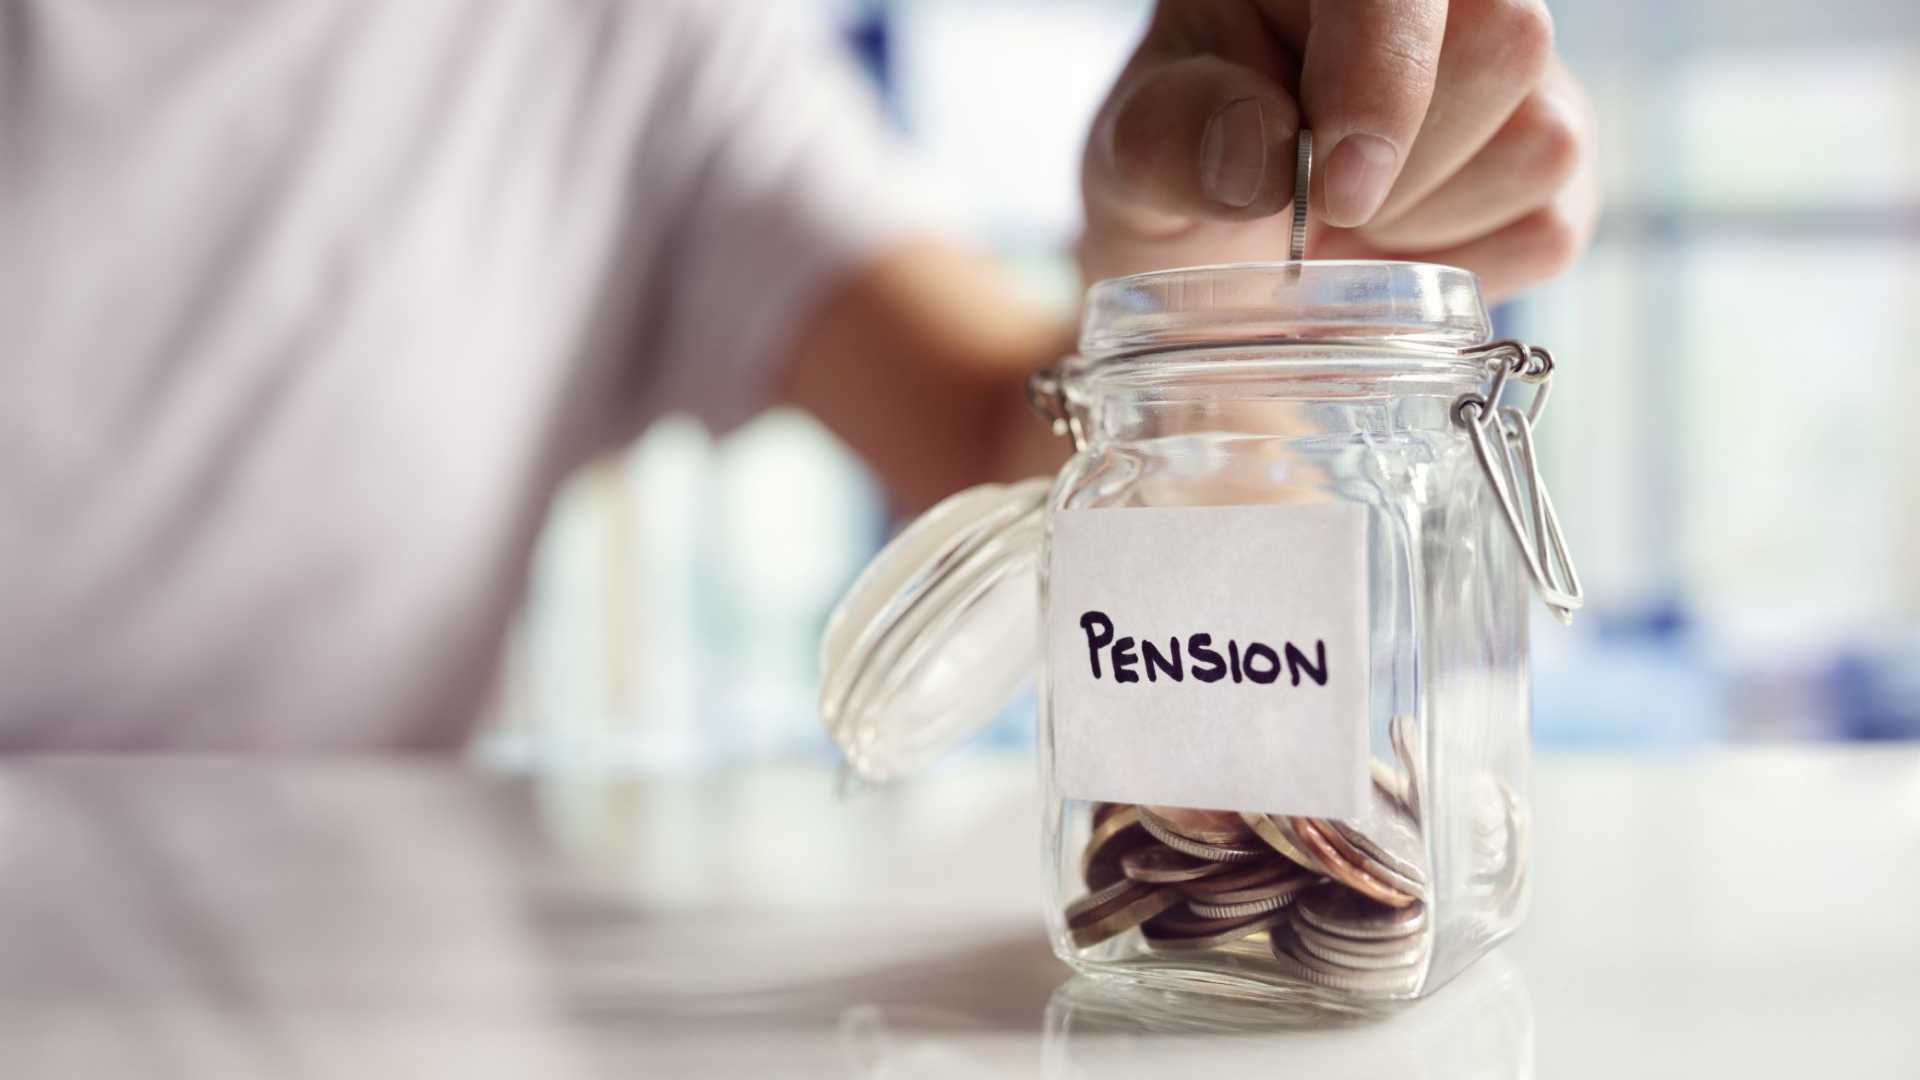 A hand putting money into a glass jar marked 'Pension'